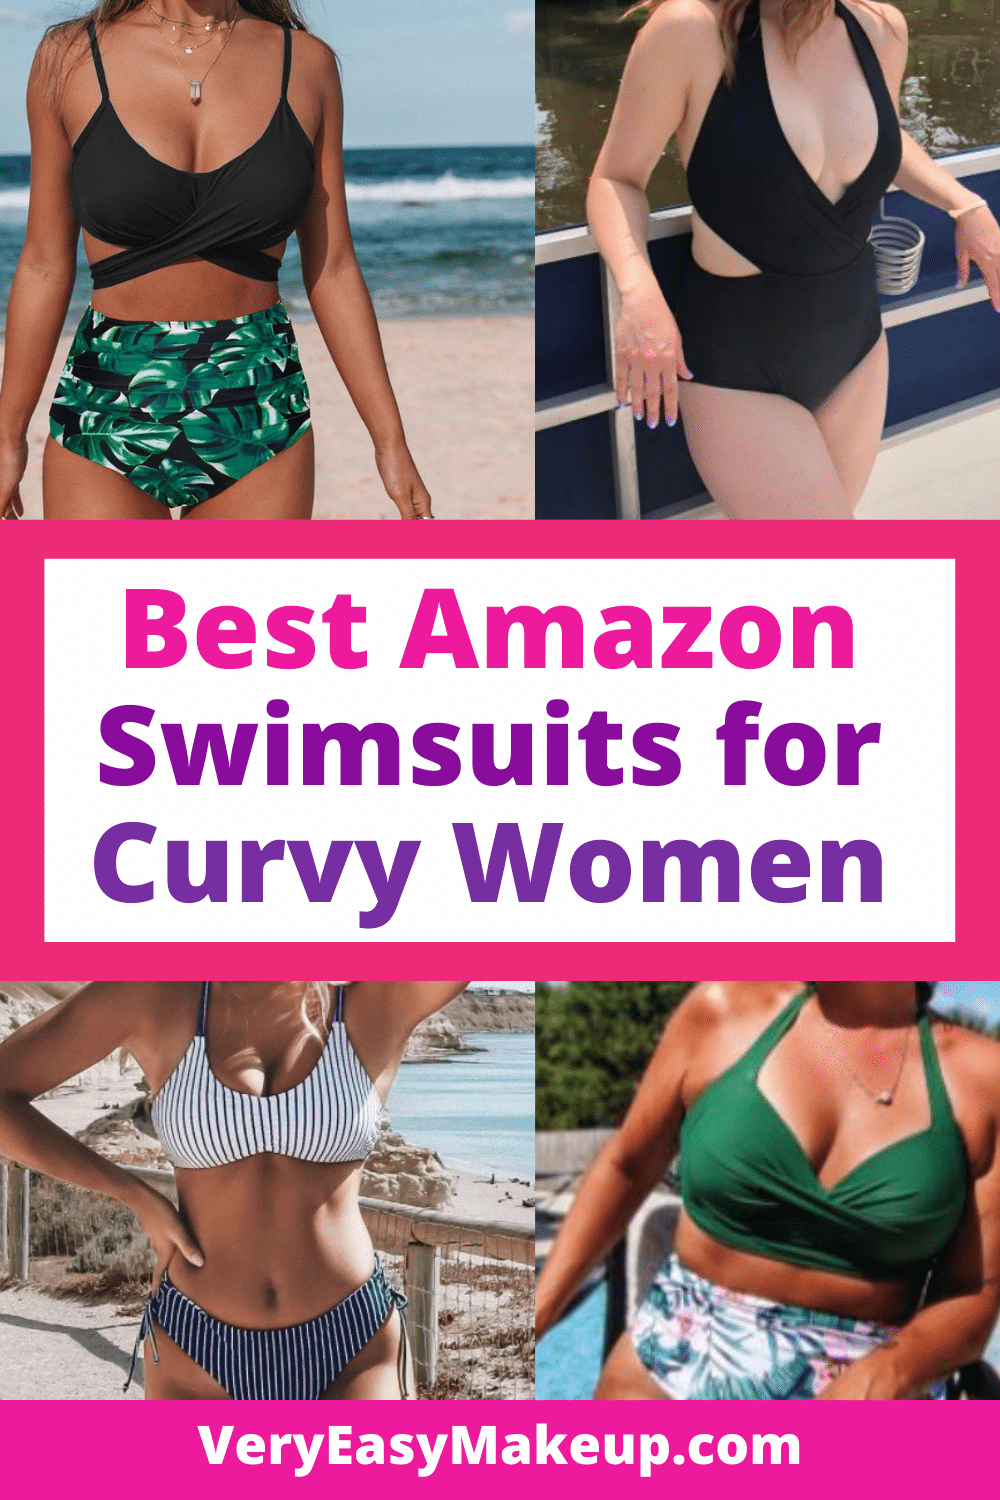 Best Amazon Swimsuits for Curvy Women Online by Very Easy Makeup